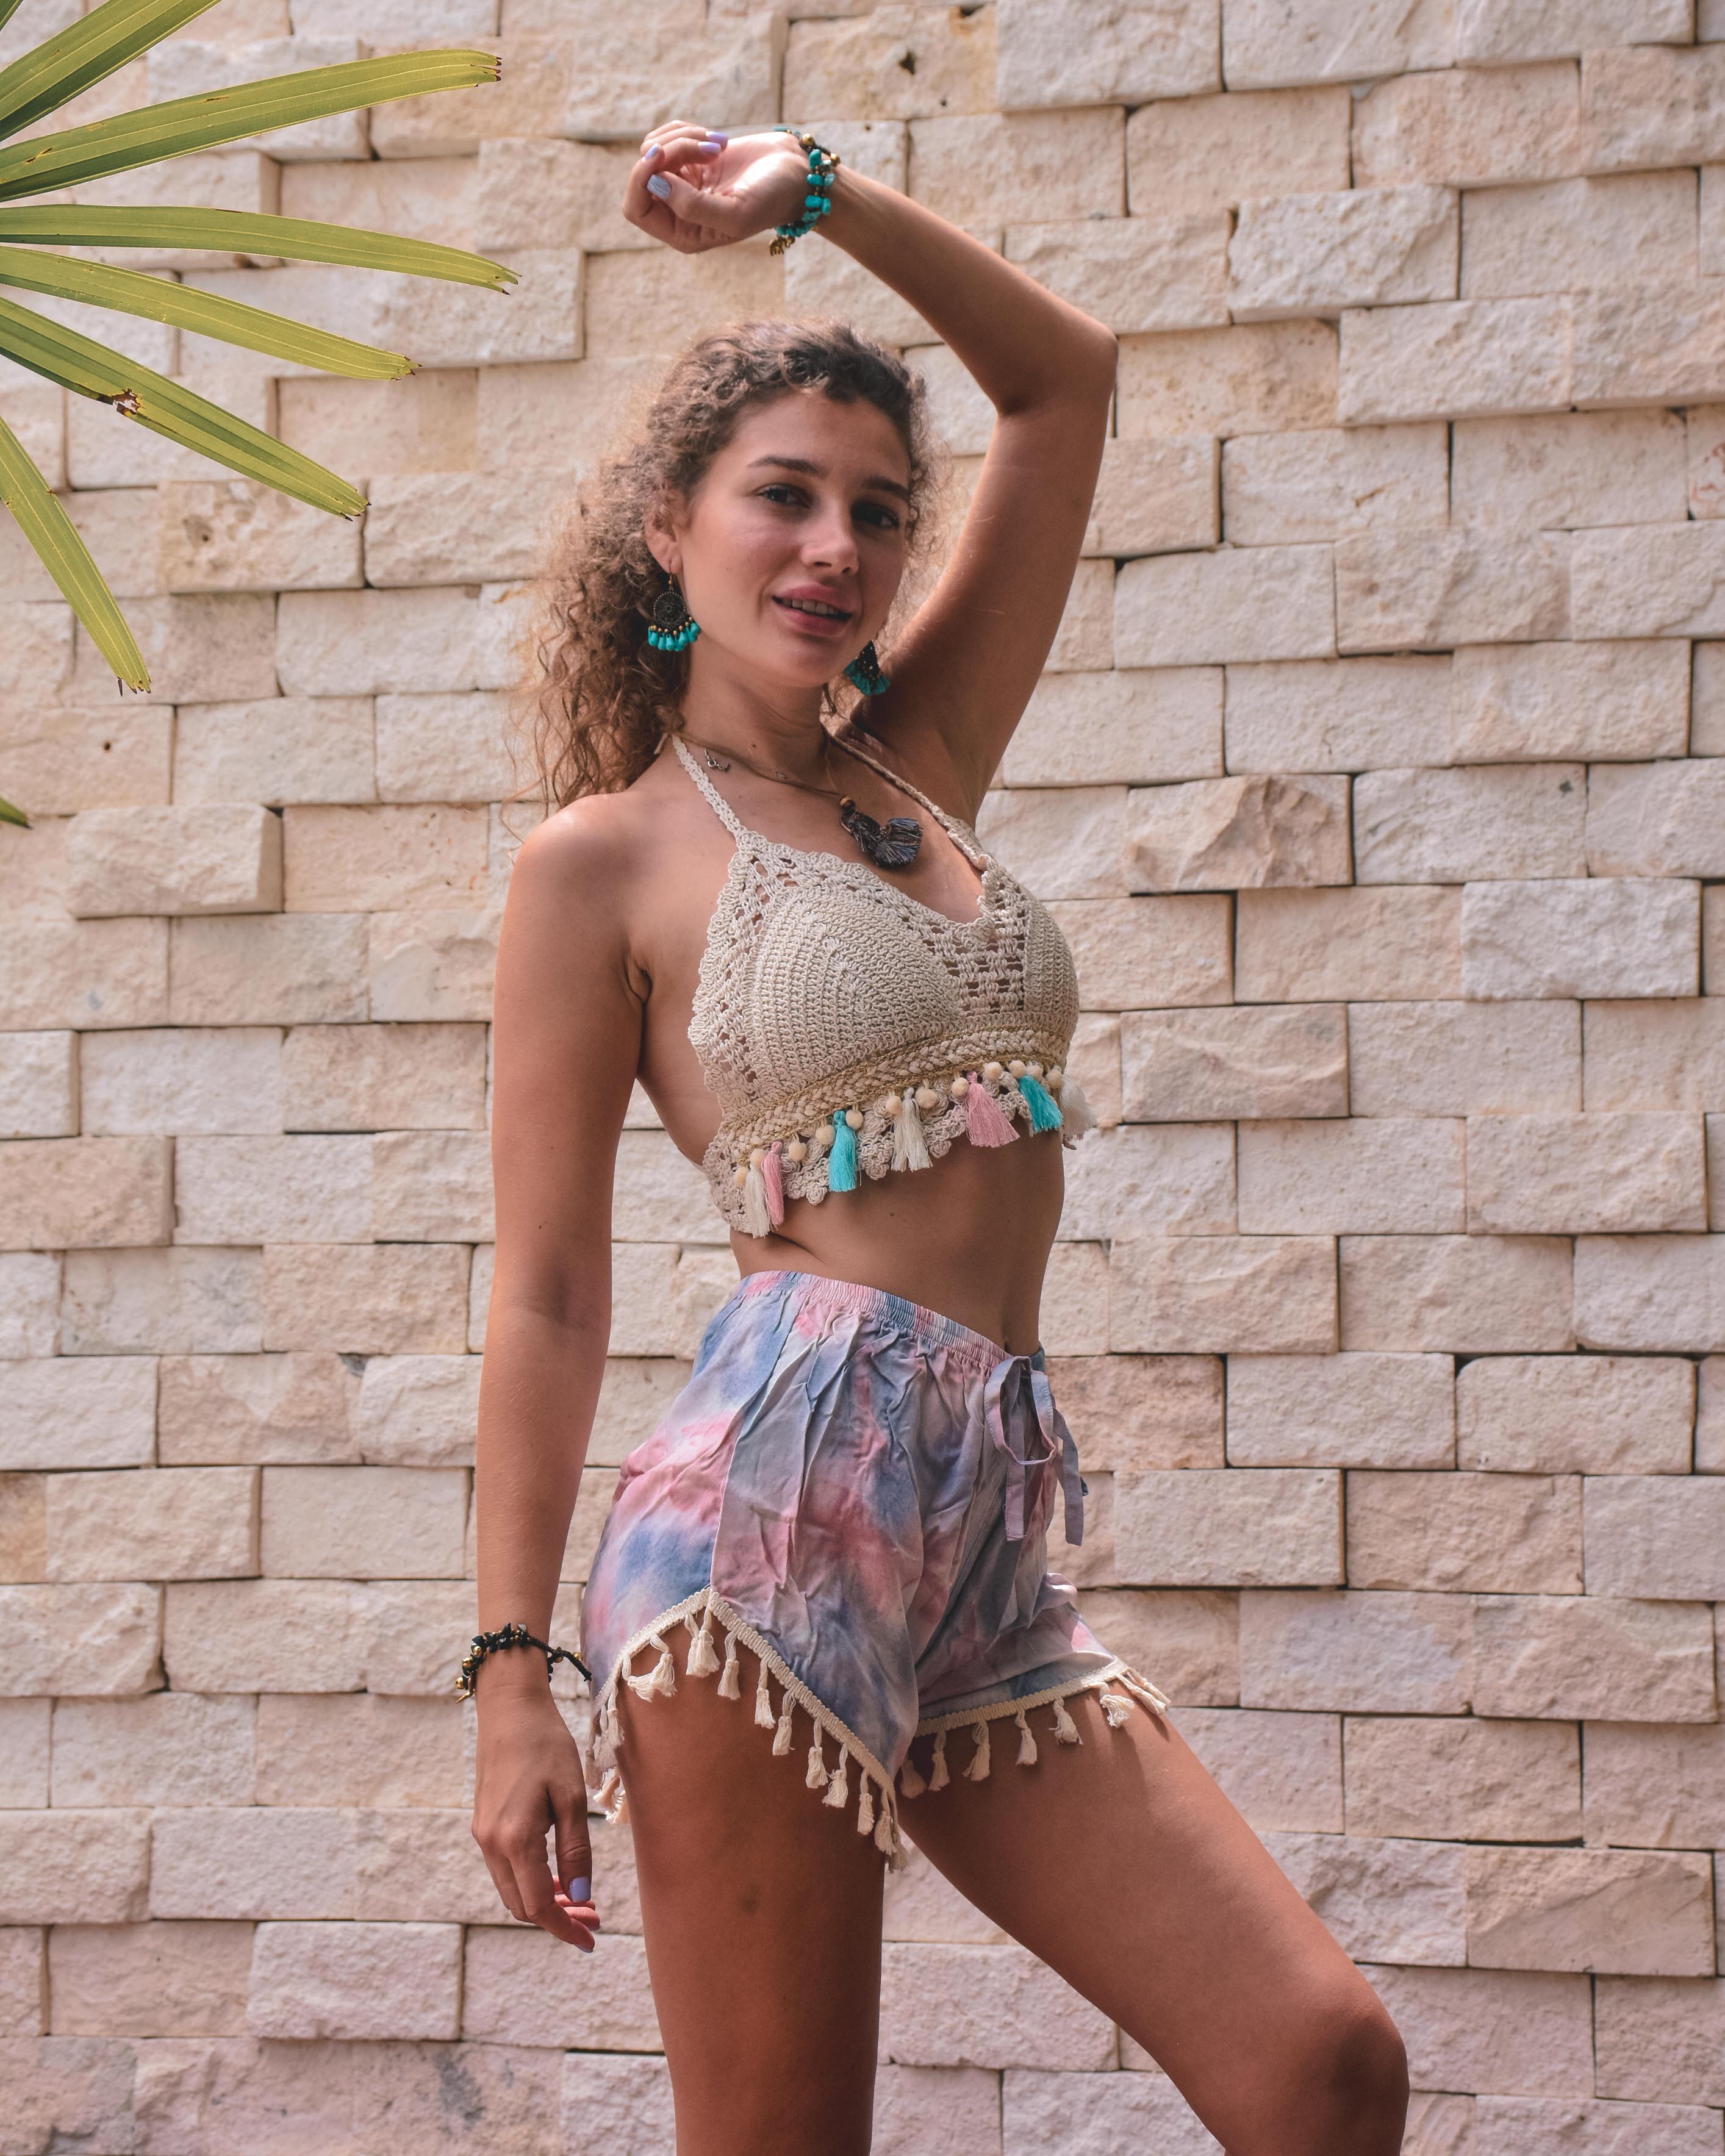 TIE DYE SHORTS Elepanta Women's Shorts - Buy Today Elephant Pants Jewelry And Bohemian Clothes Handmade In Thailand Help To Save The Elephants FairTrade And Vegan